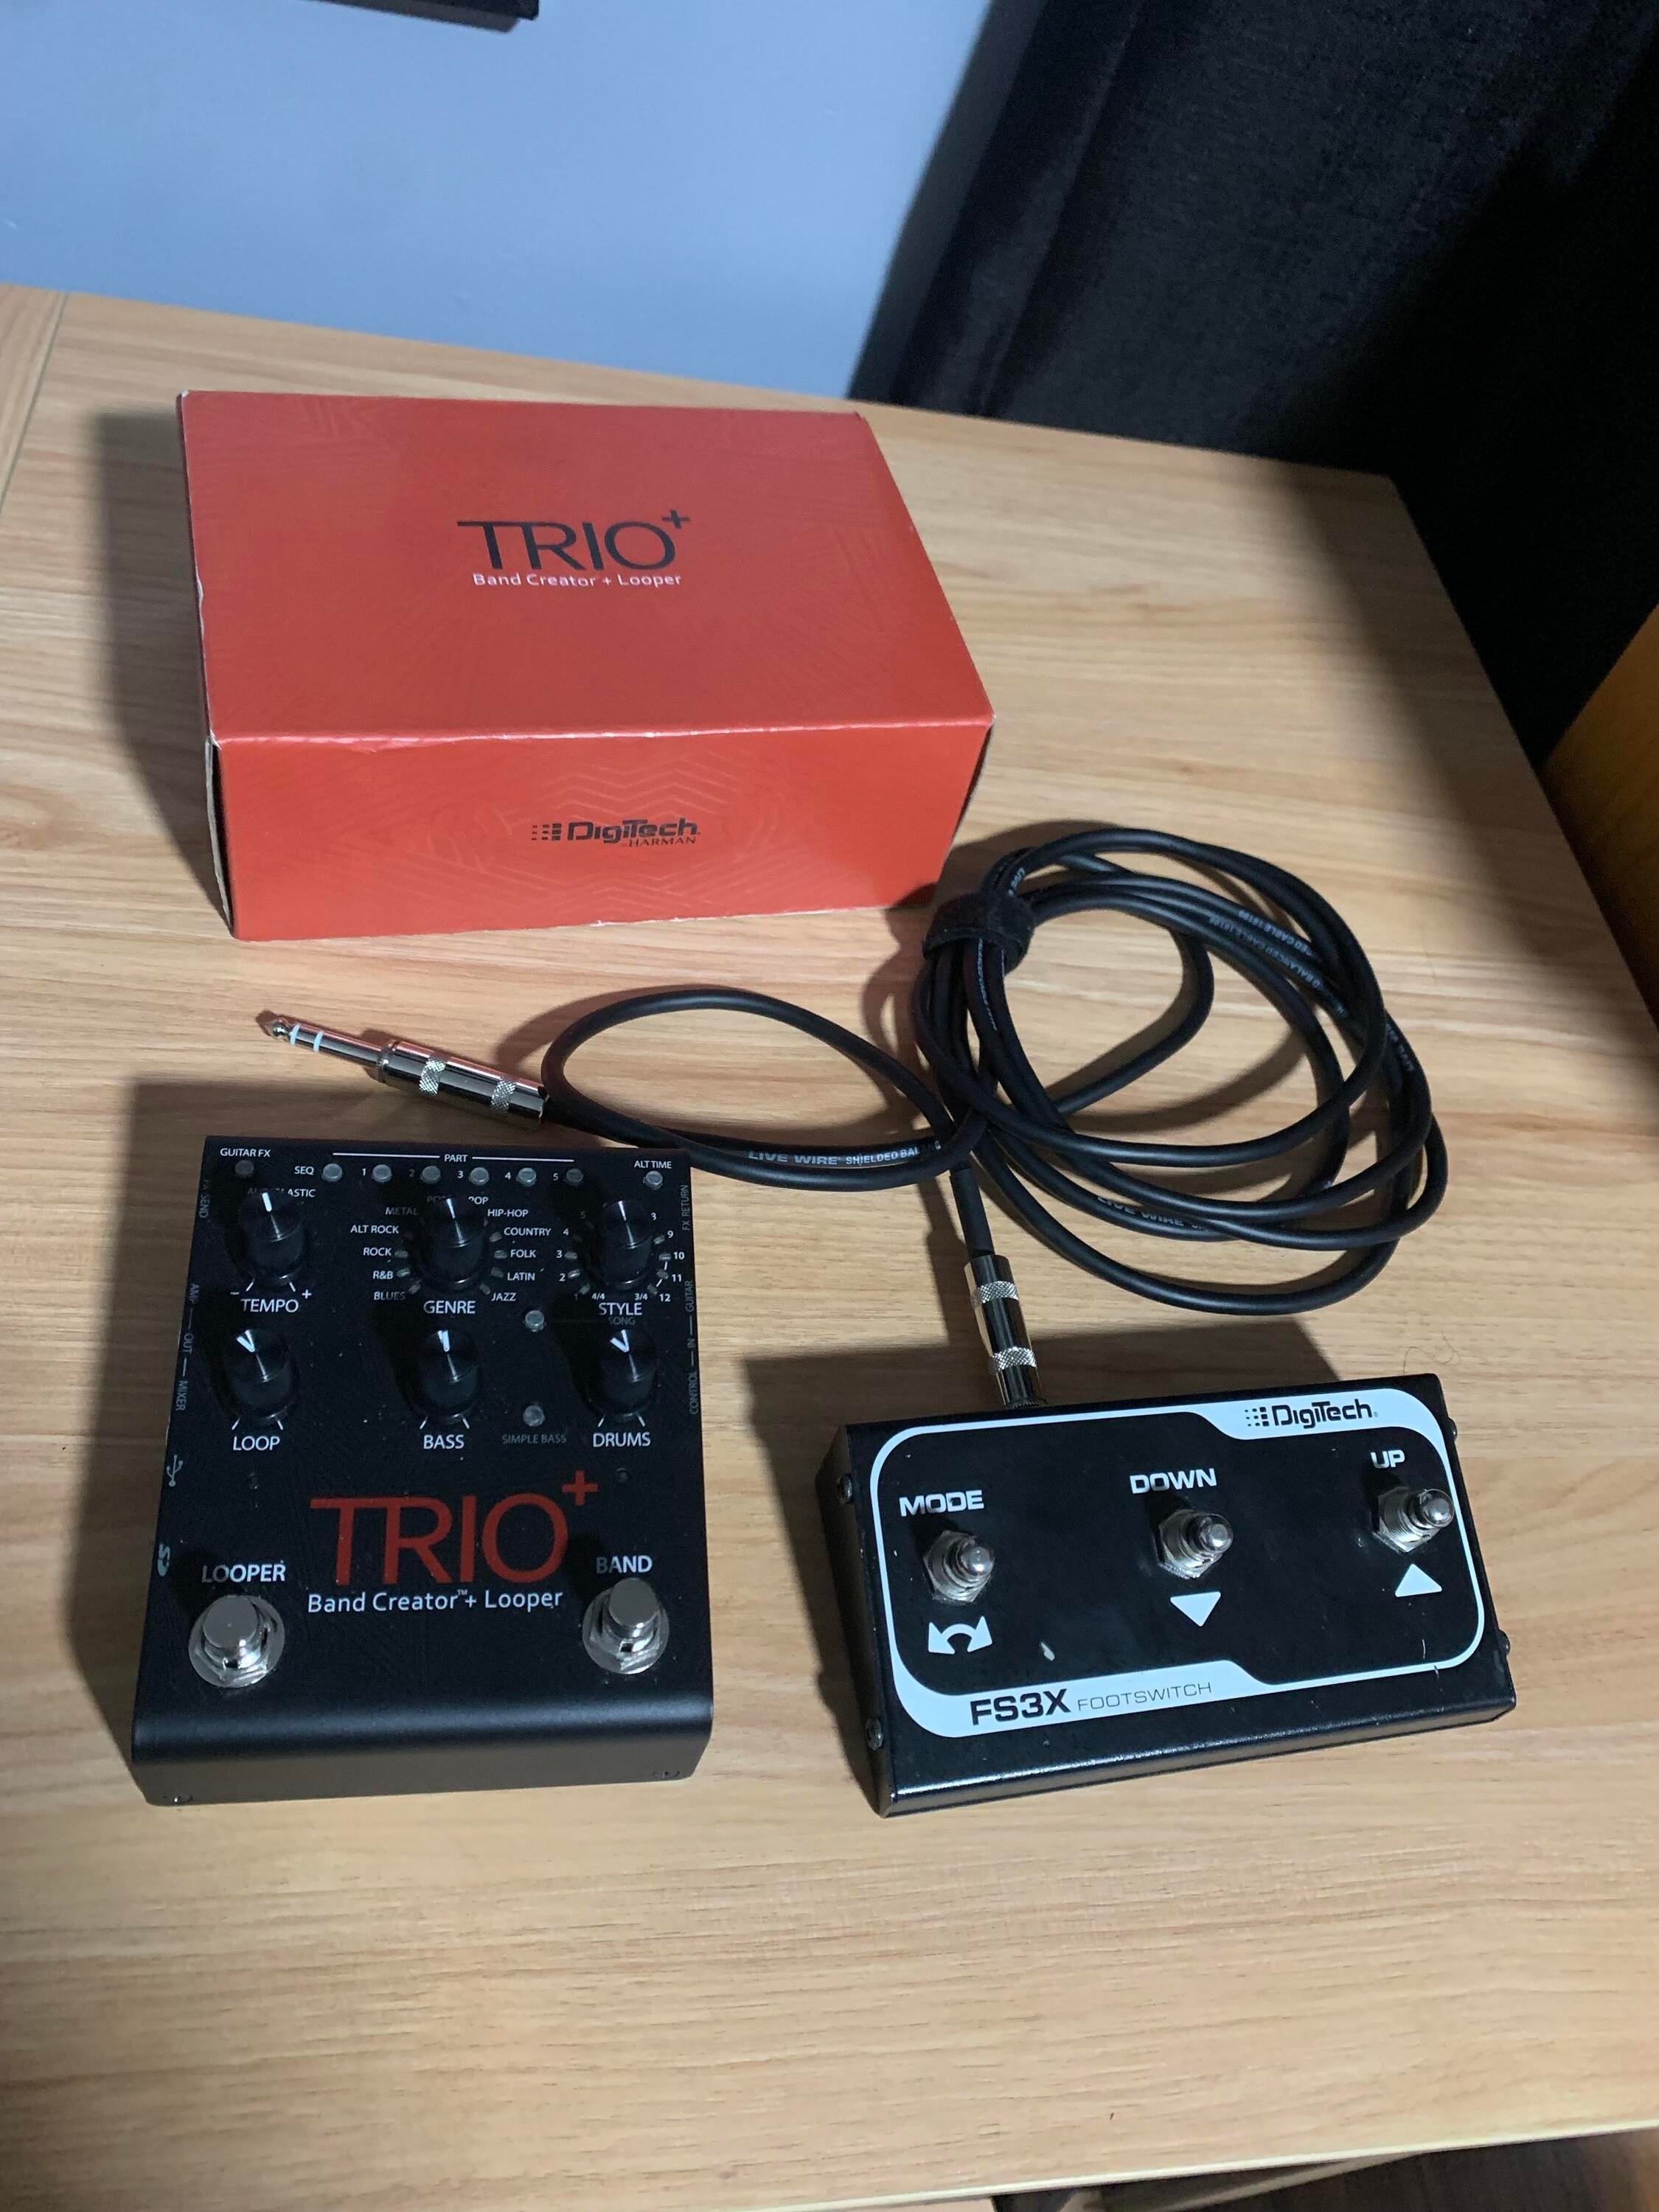 Used Digitech Trio+ Band Creator and Looper Pedal